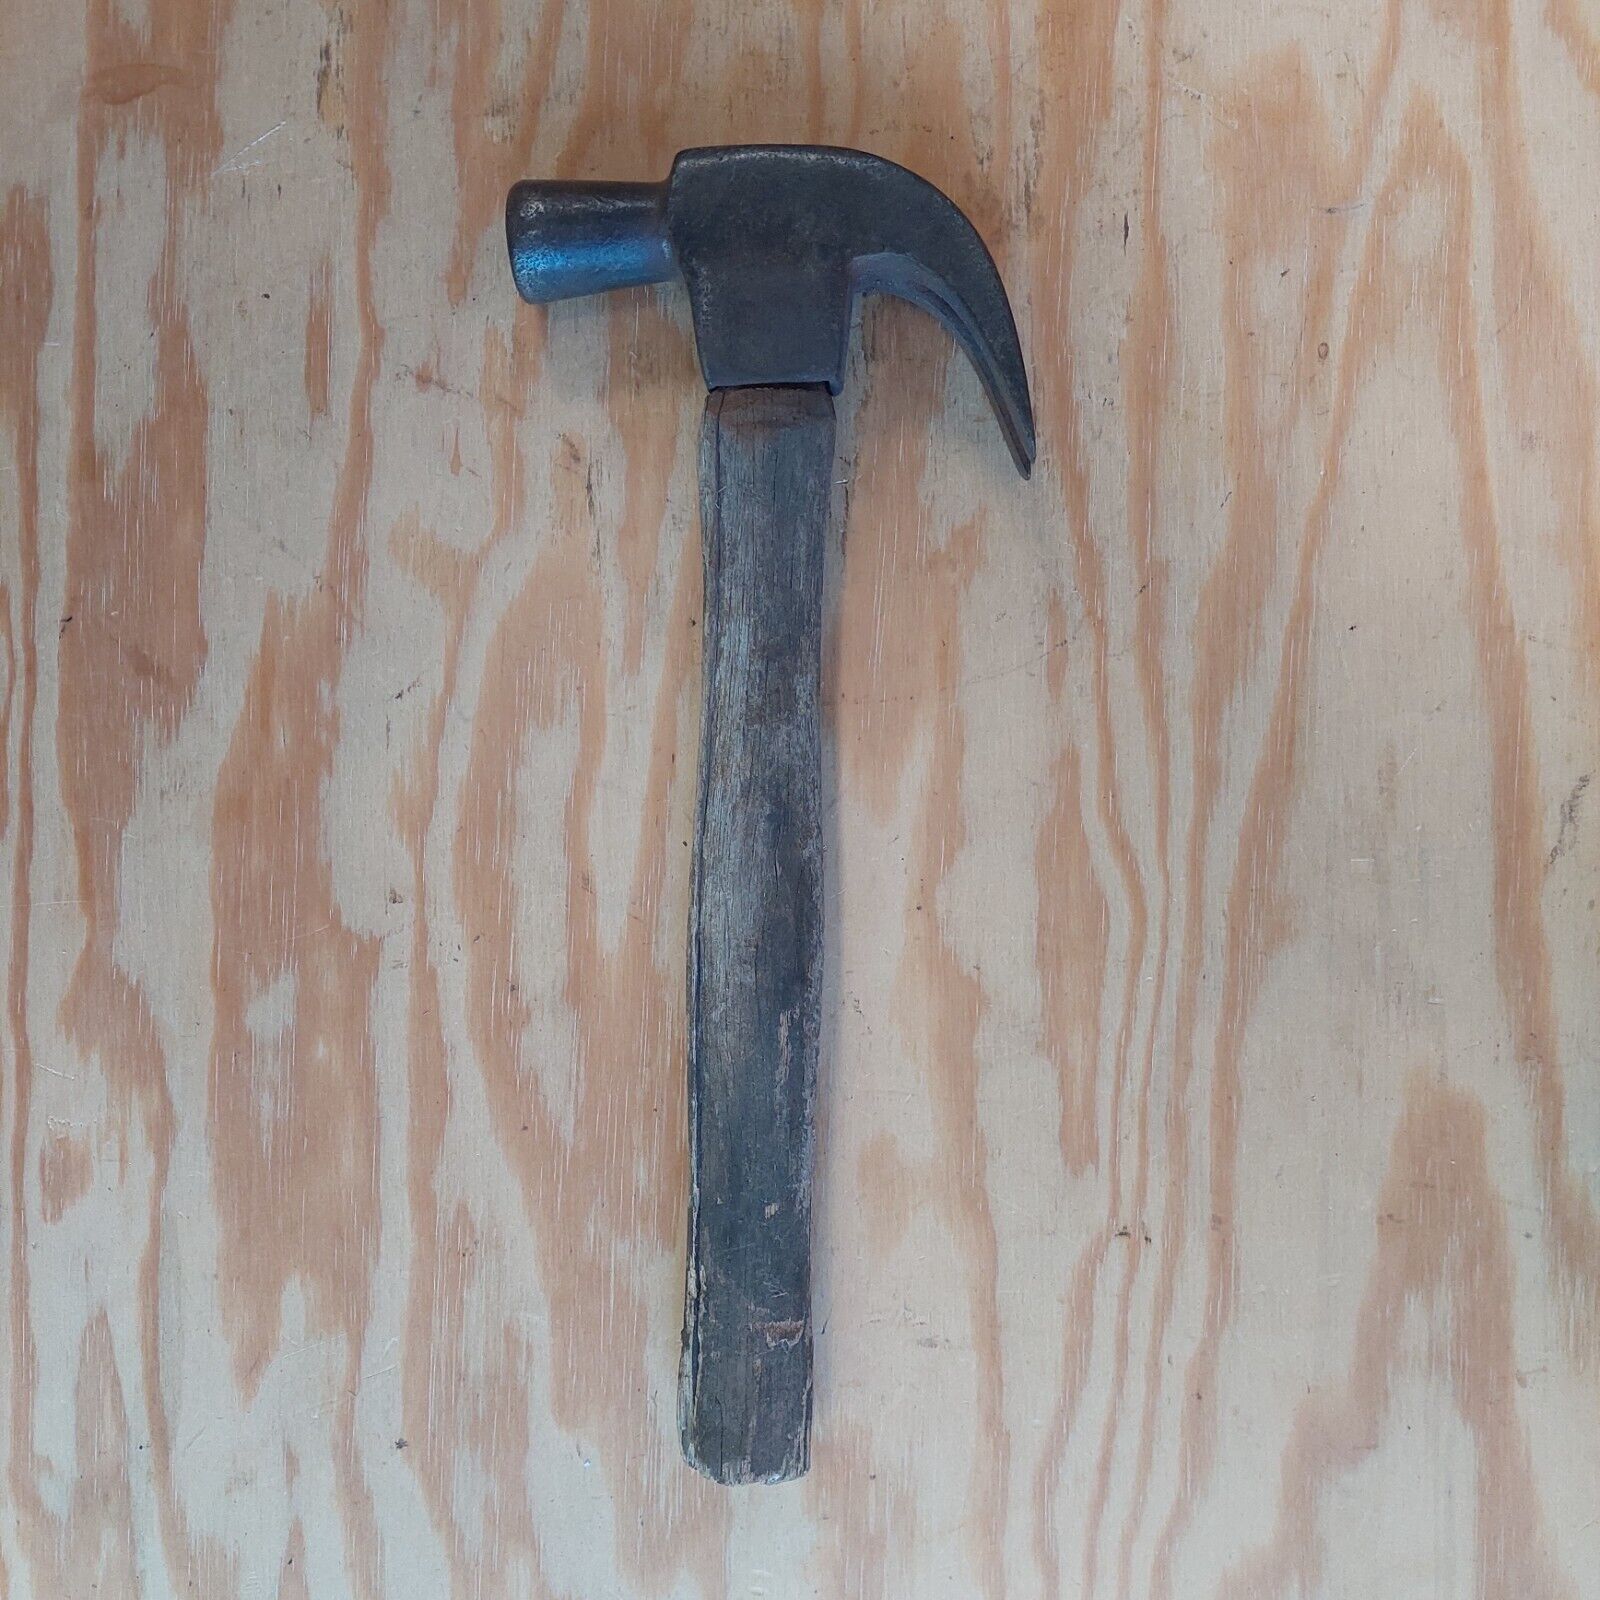 RARE Vintage Claw Hammer Nail Holding Needs New Handle old tool